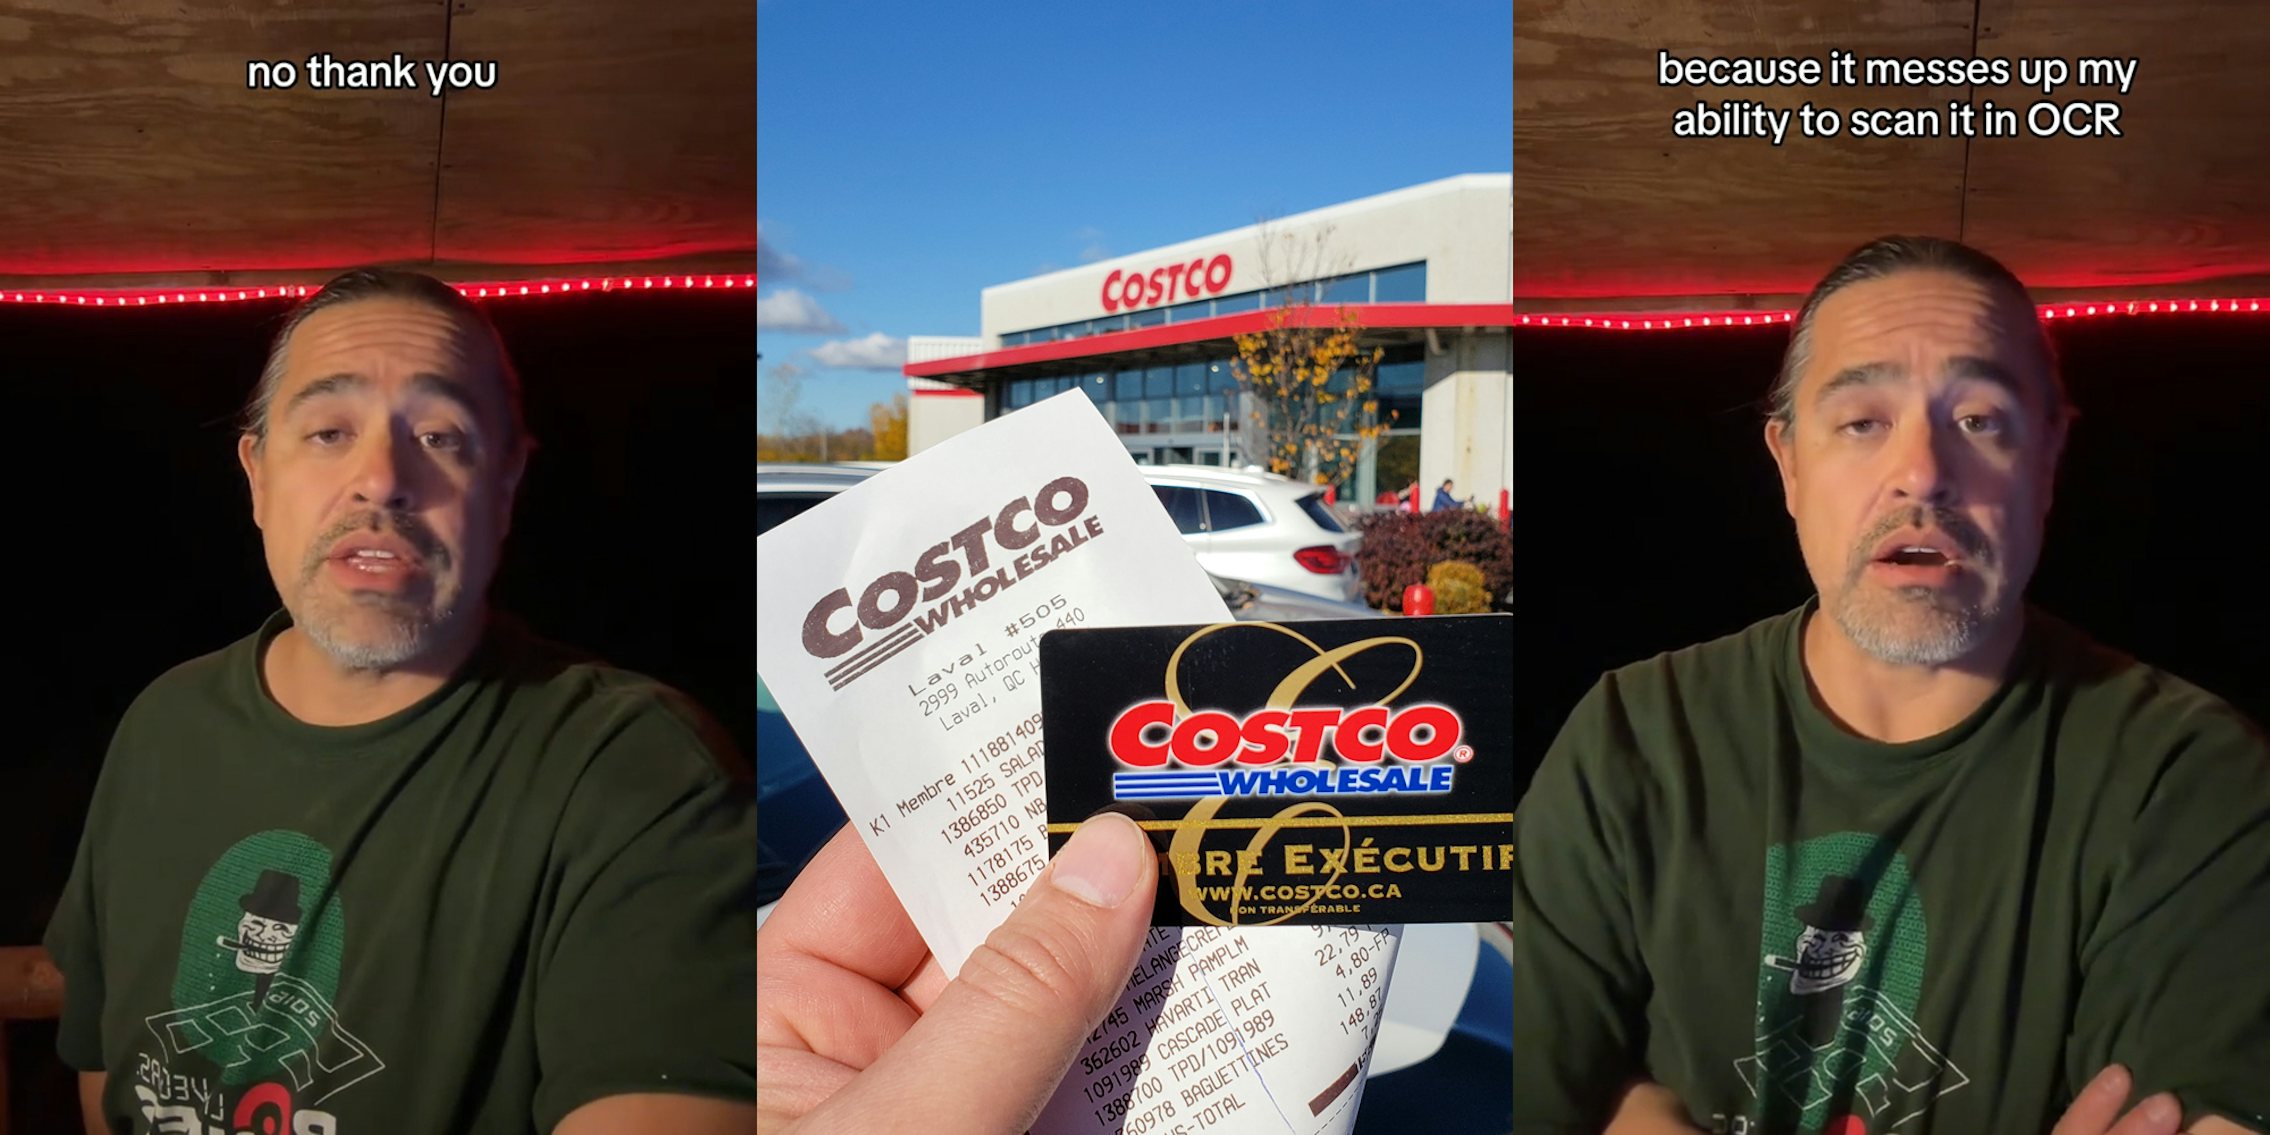 Costco customer speaking with caption 'no thank you' (l) Costco customer with receipt and card outside in front of Costco building (c) Costco customer speaking with caption 'because it messes up my ability to scan it in OCR' (r)